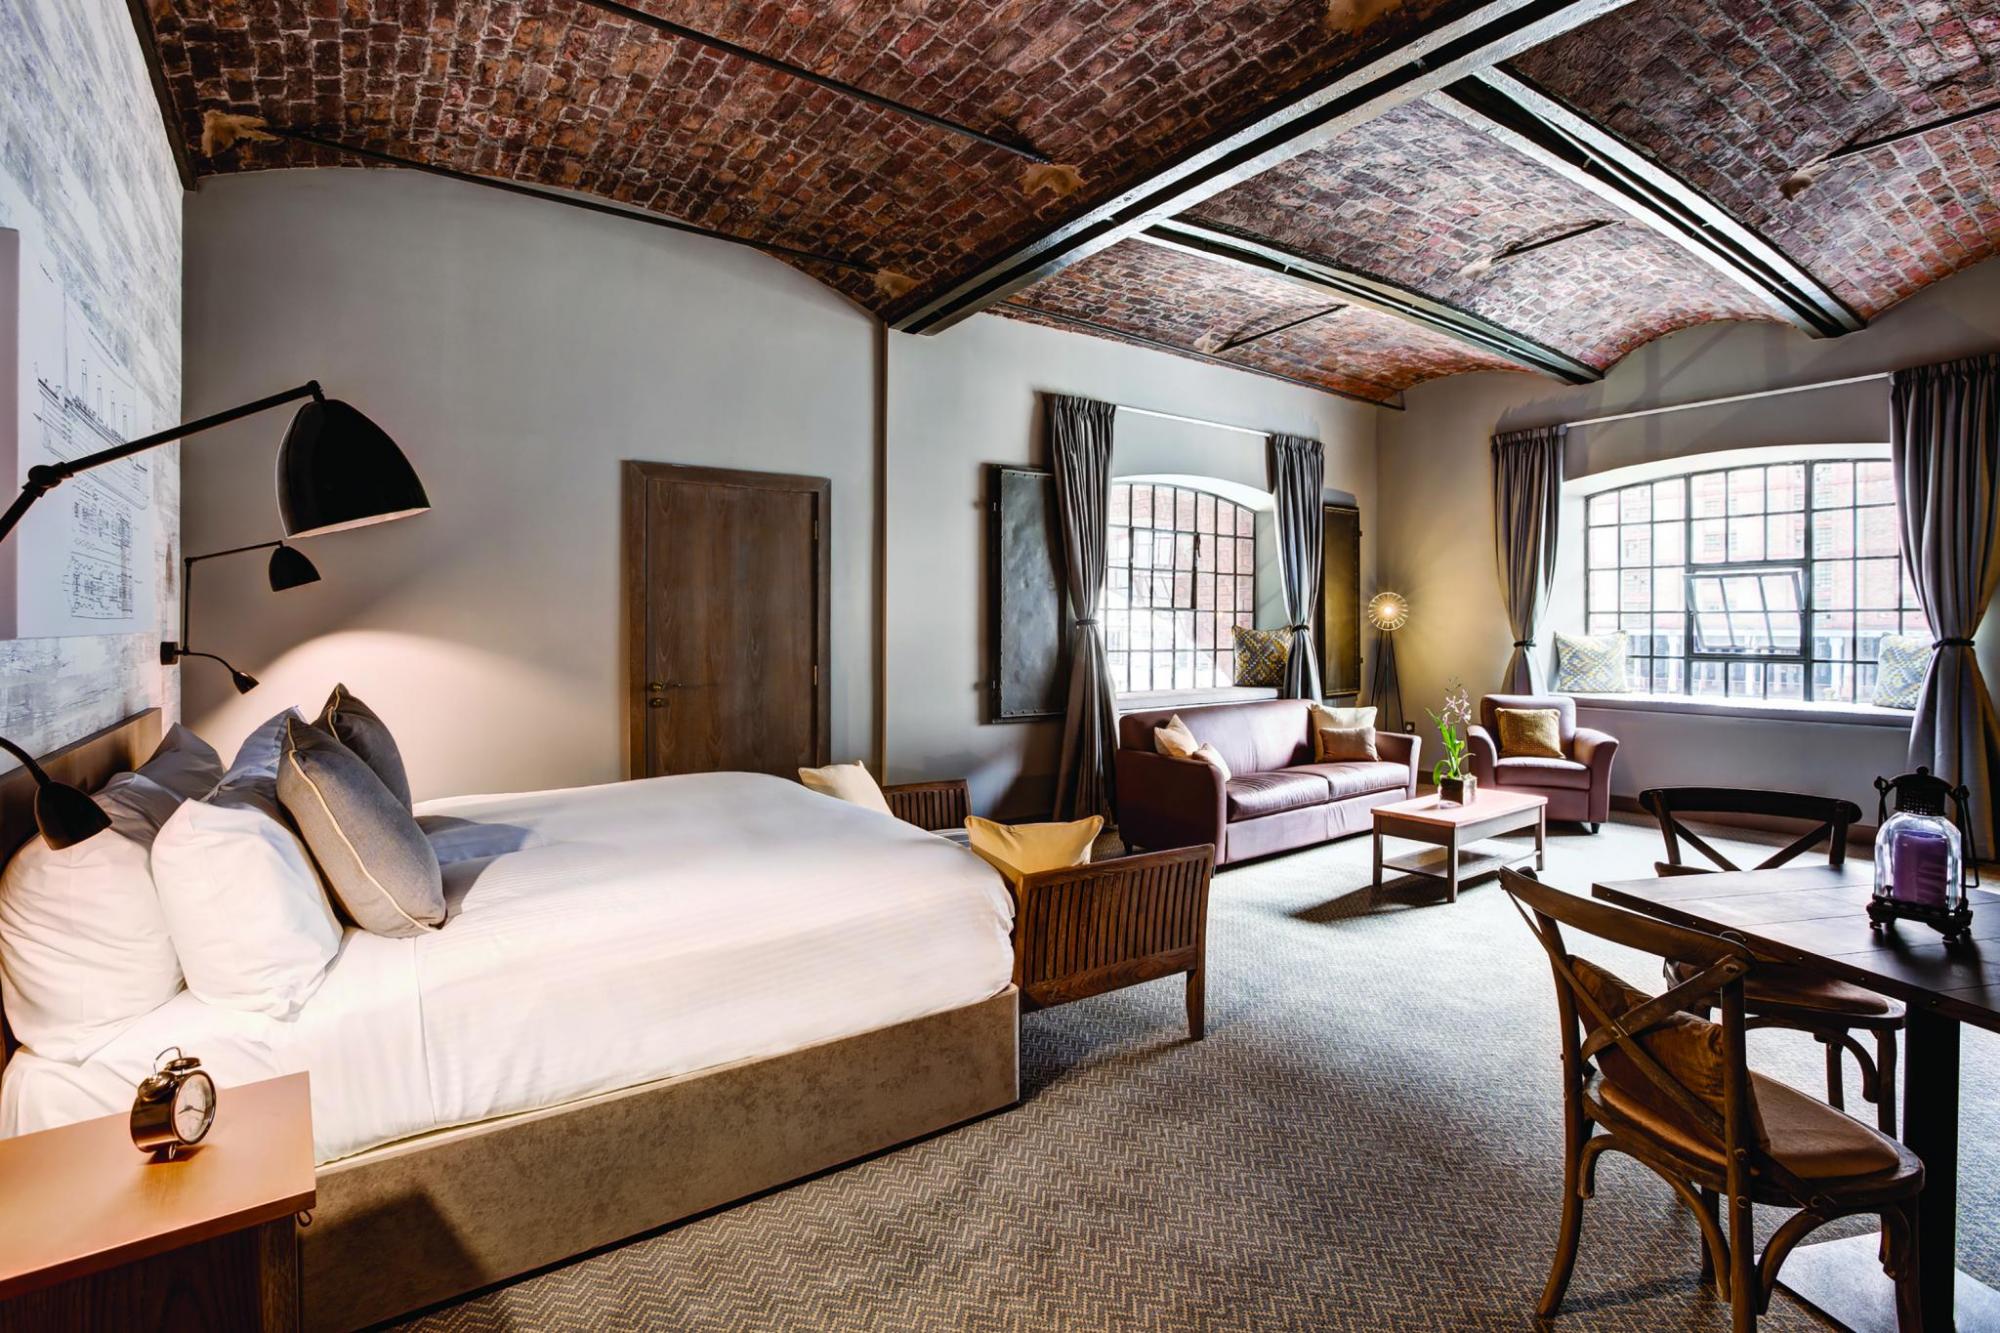 Large hotel room with exposed brick ceilings and steel beams, with big window letting in light